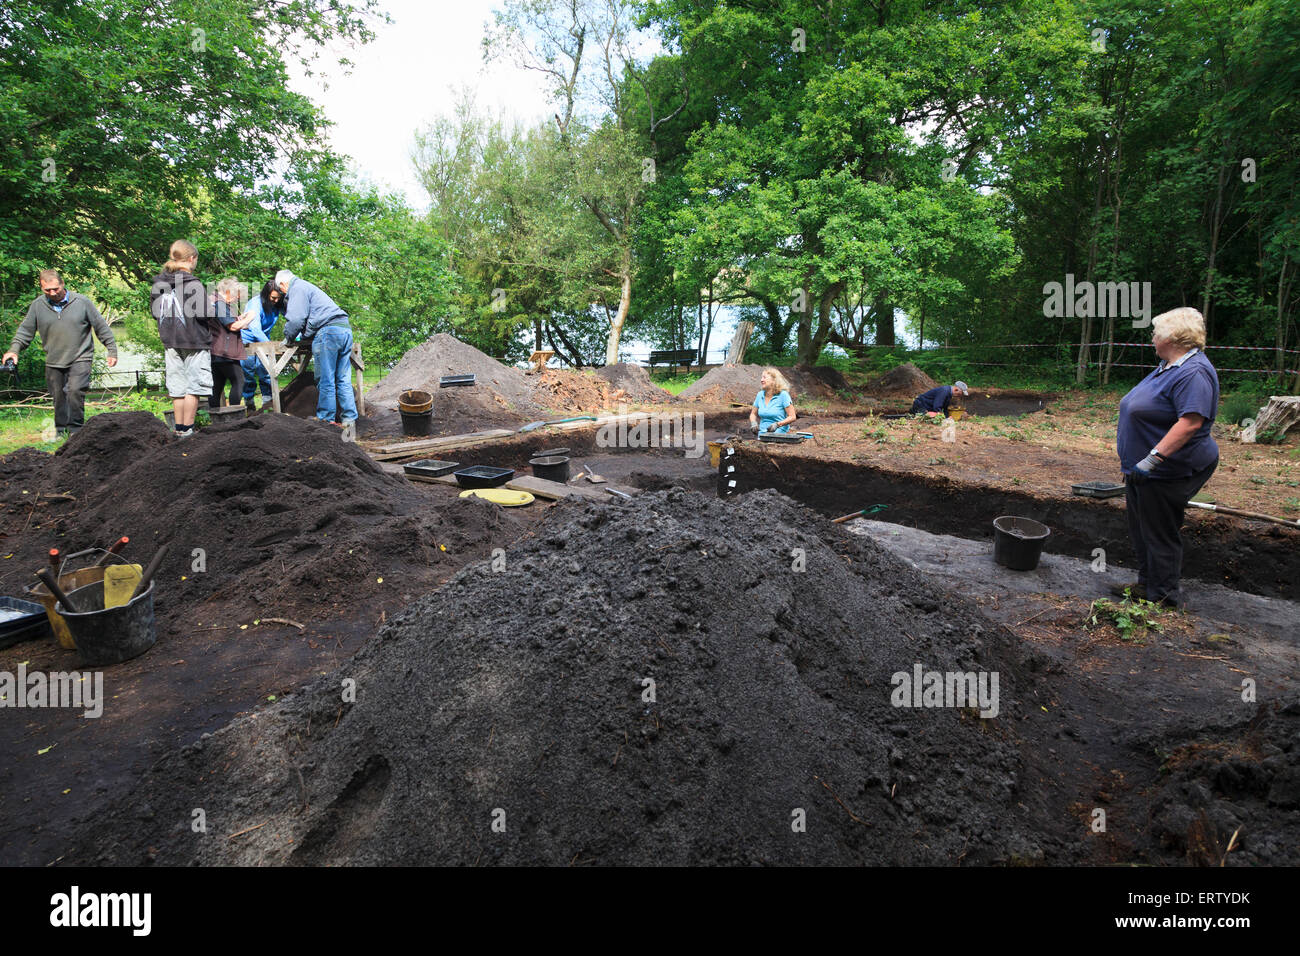 Archaeologists working on a Bronze Age excavation trench in a forest Stock Photo